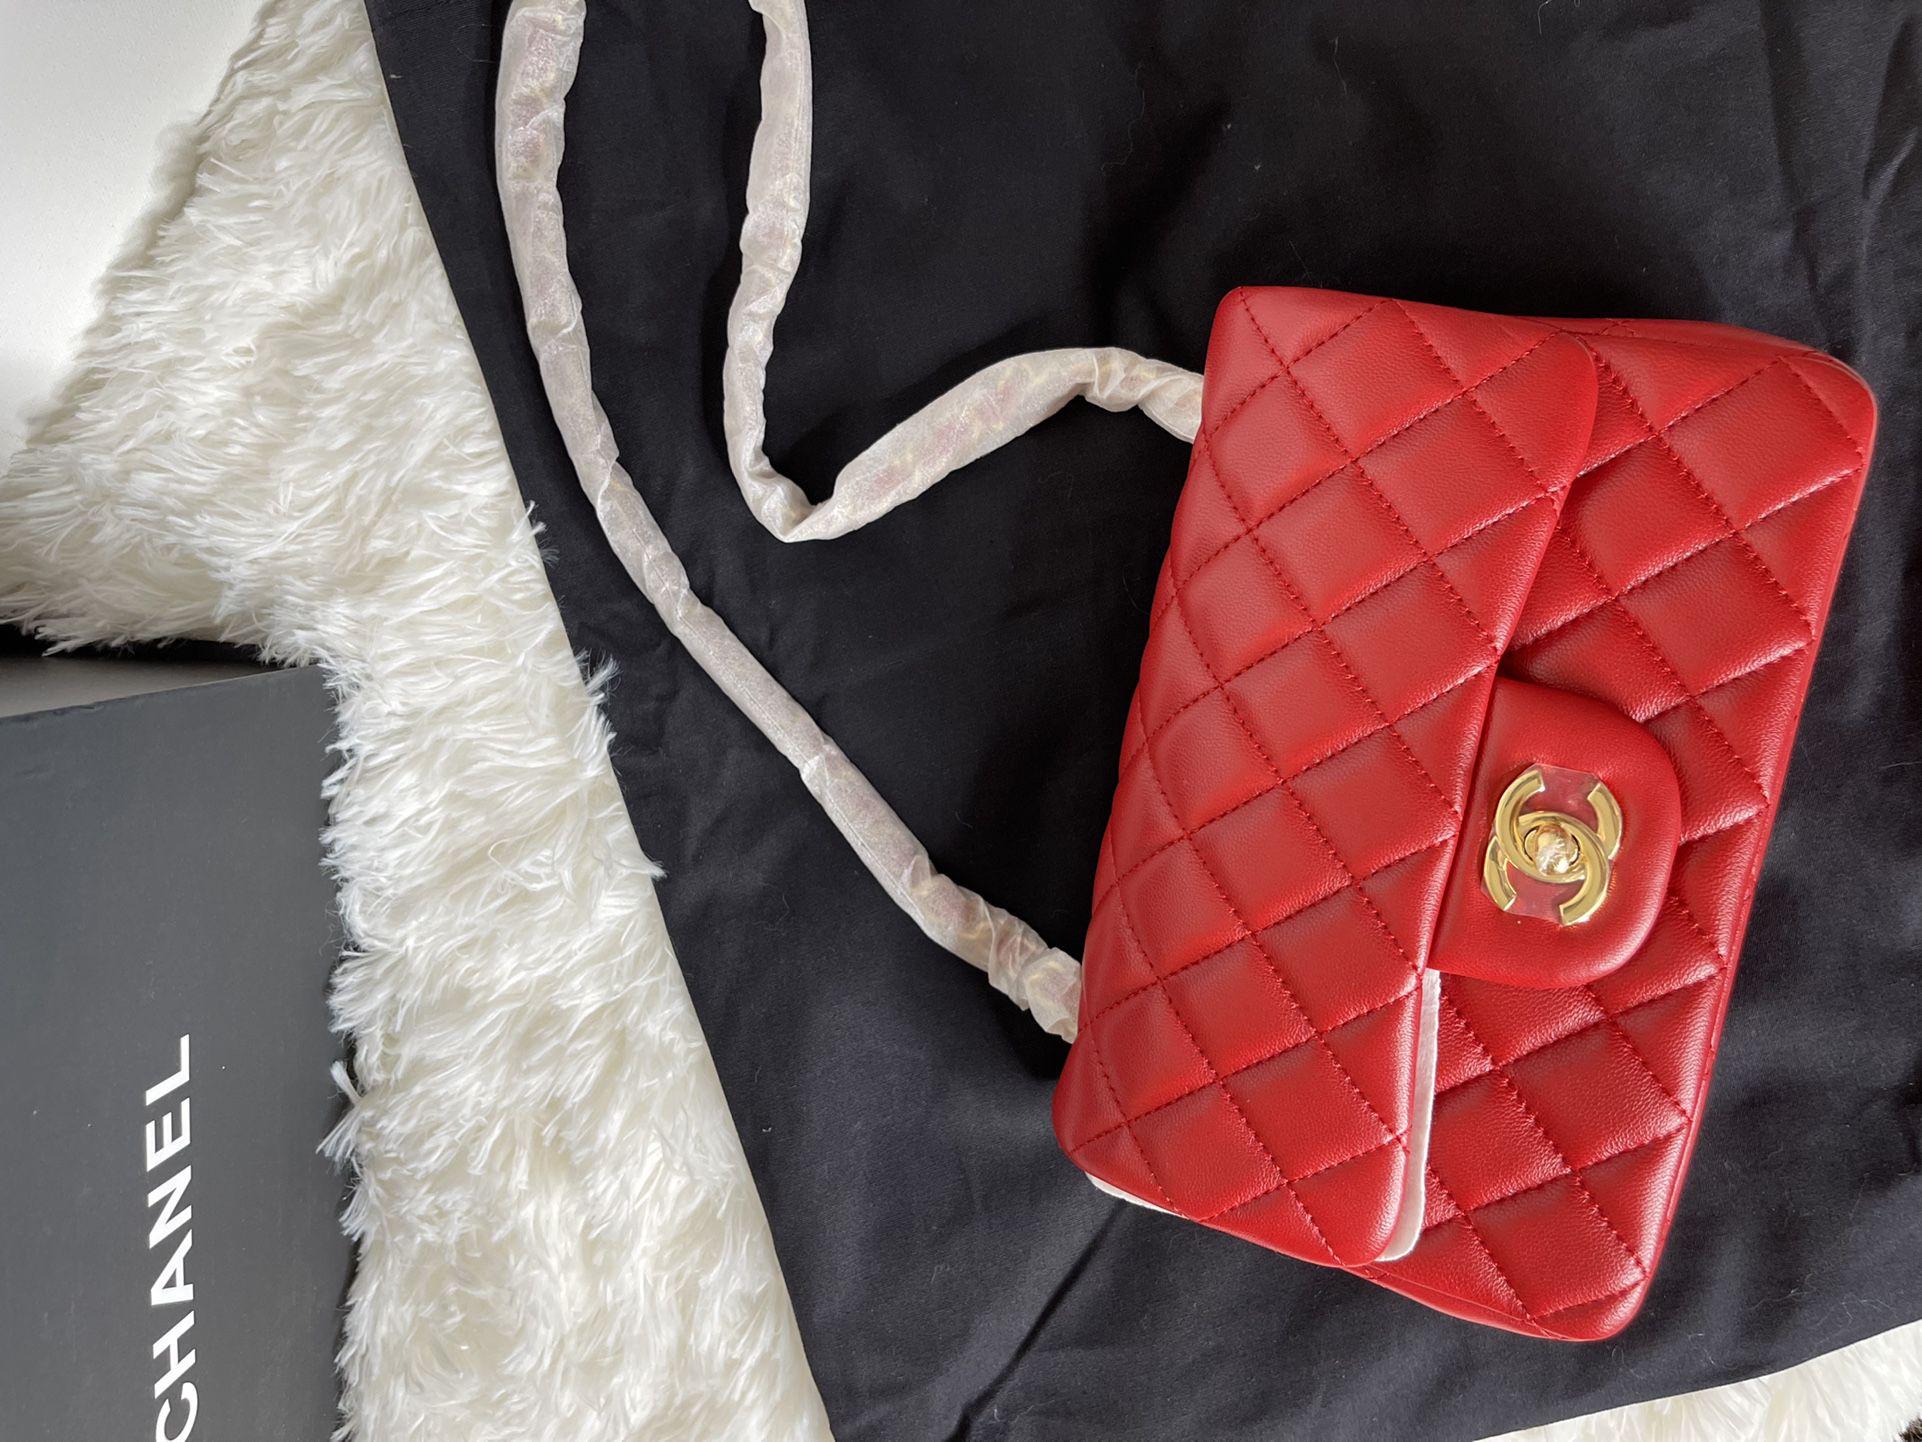 Chanel Red Double Flap Bag 